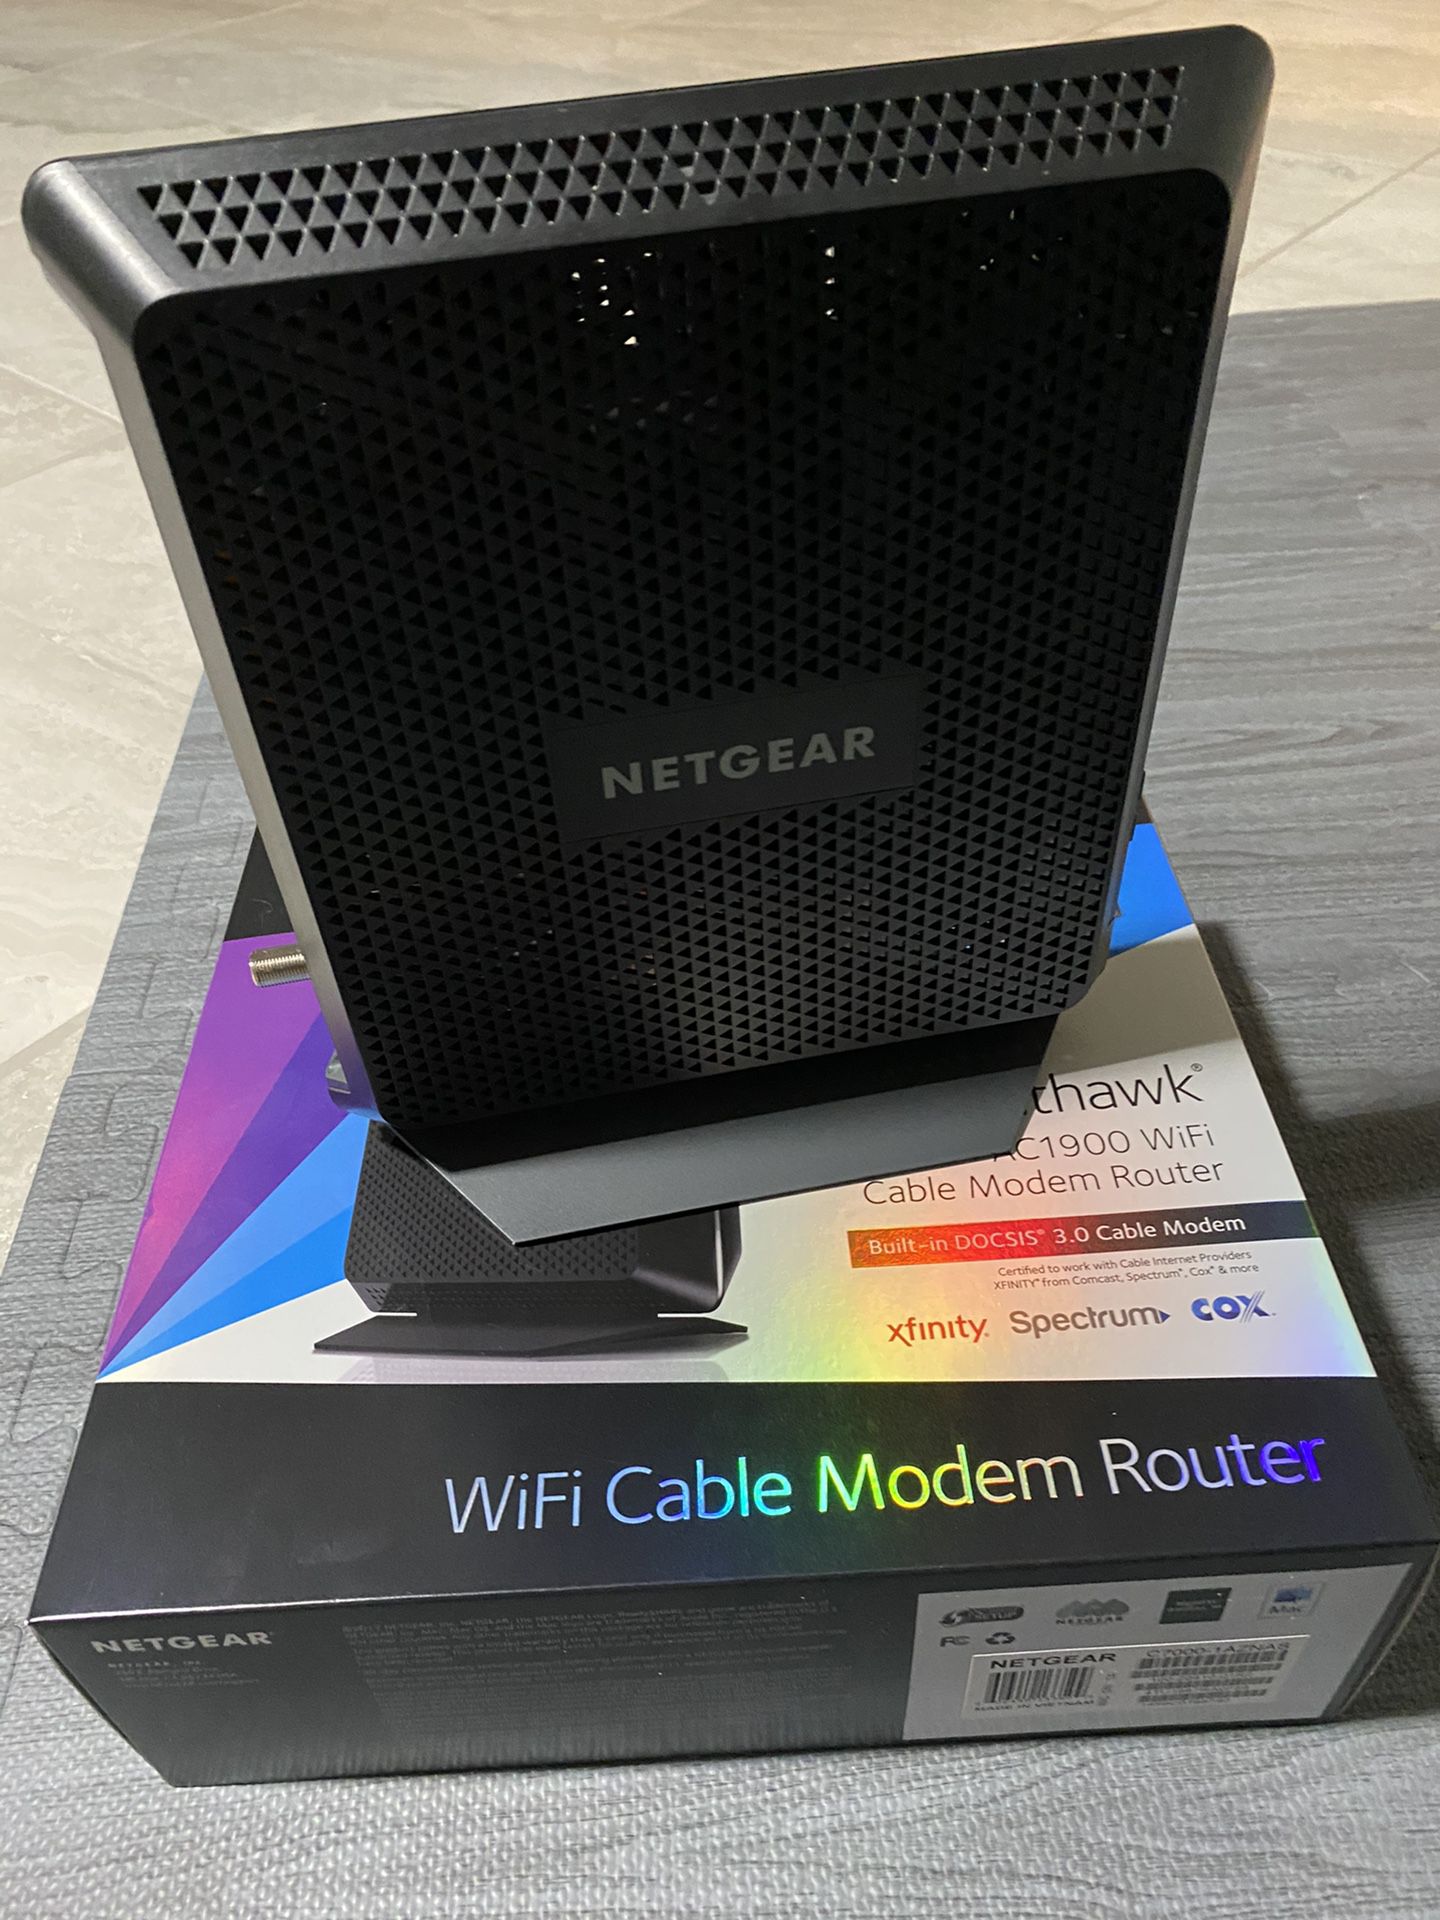 Nighthawk AC1900 WiFi Cable Modem Router